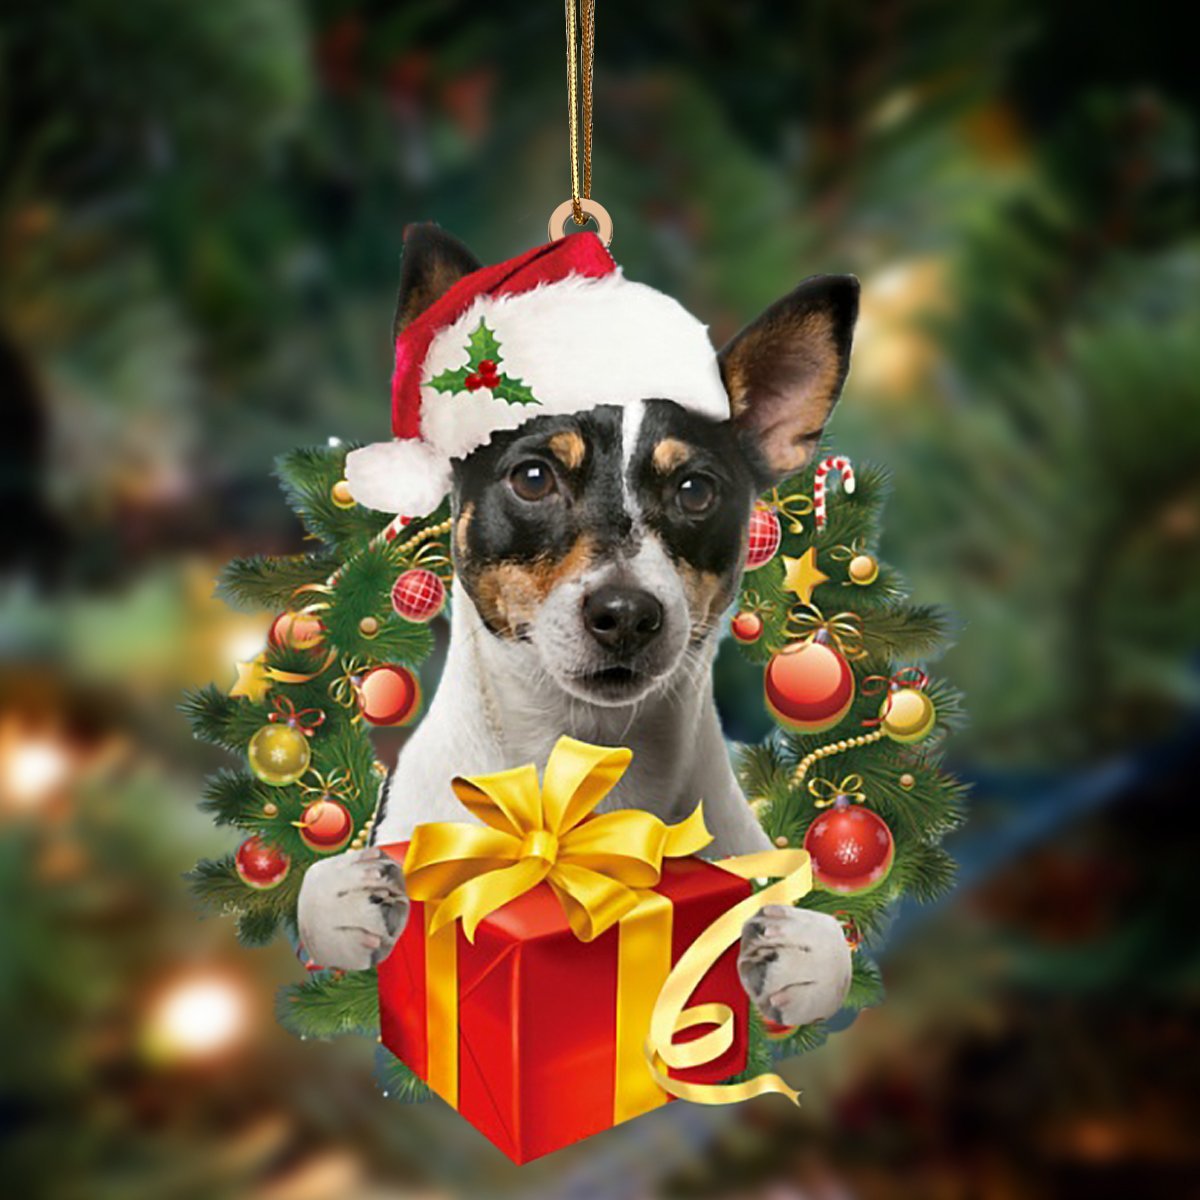 Jack Russell Terrier-Dogs give gifts Hanging Ornament